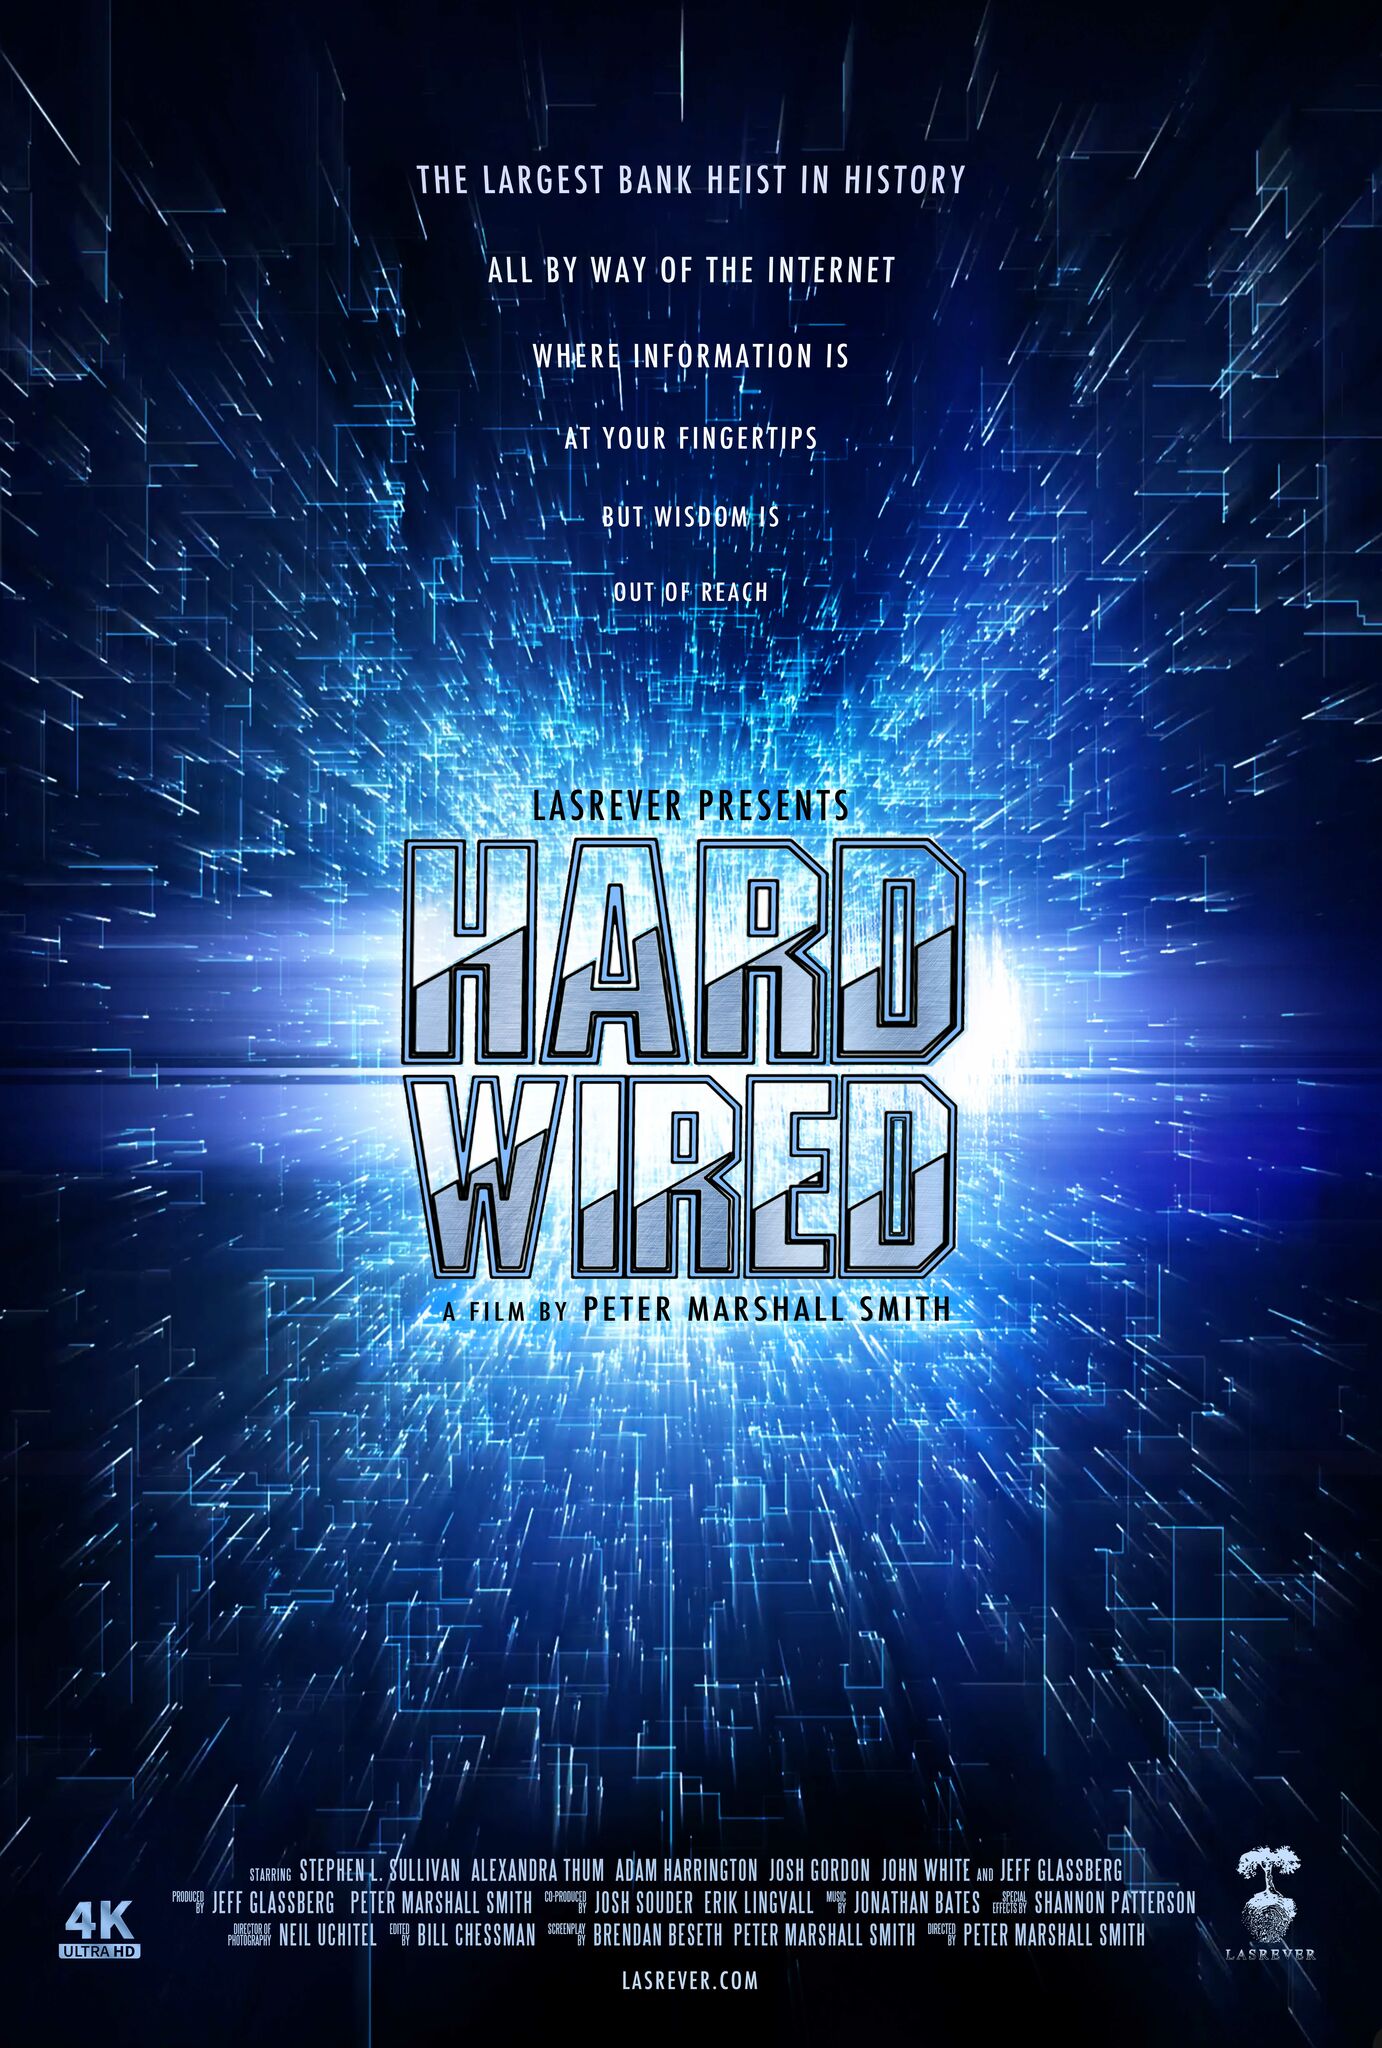 Hard-Wired